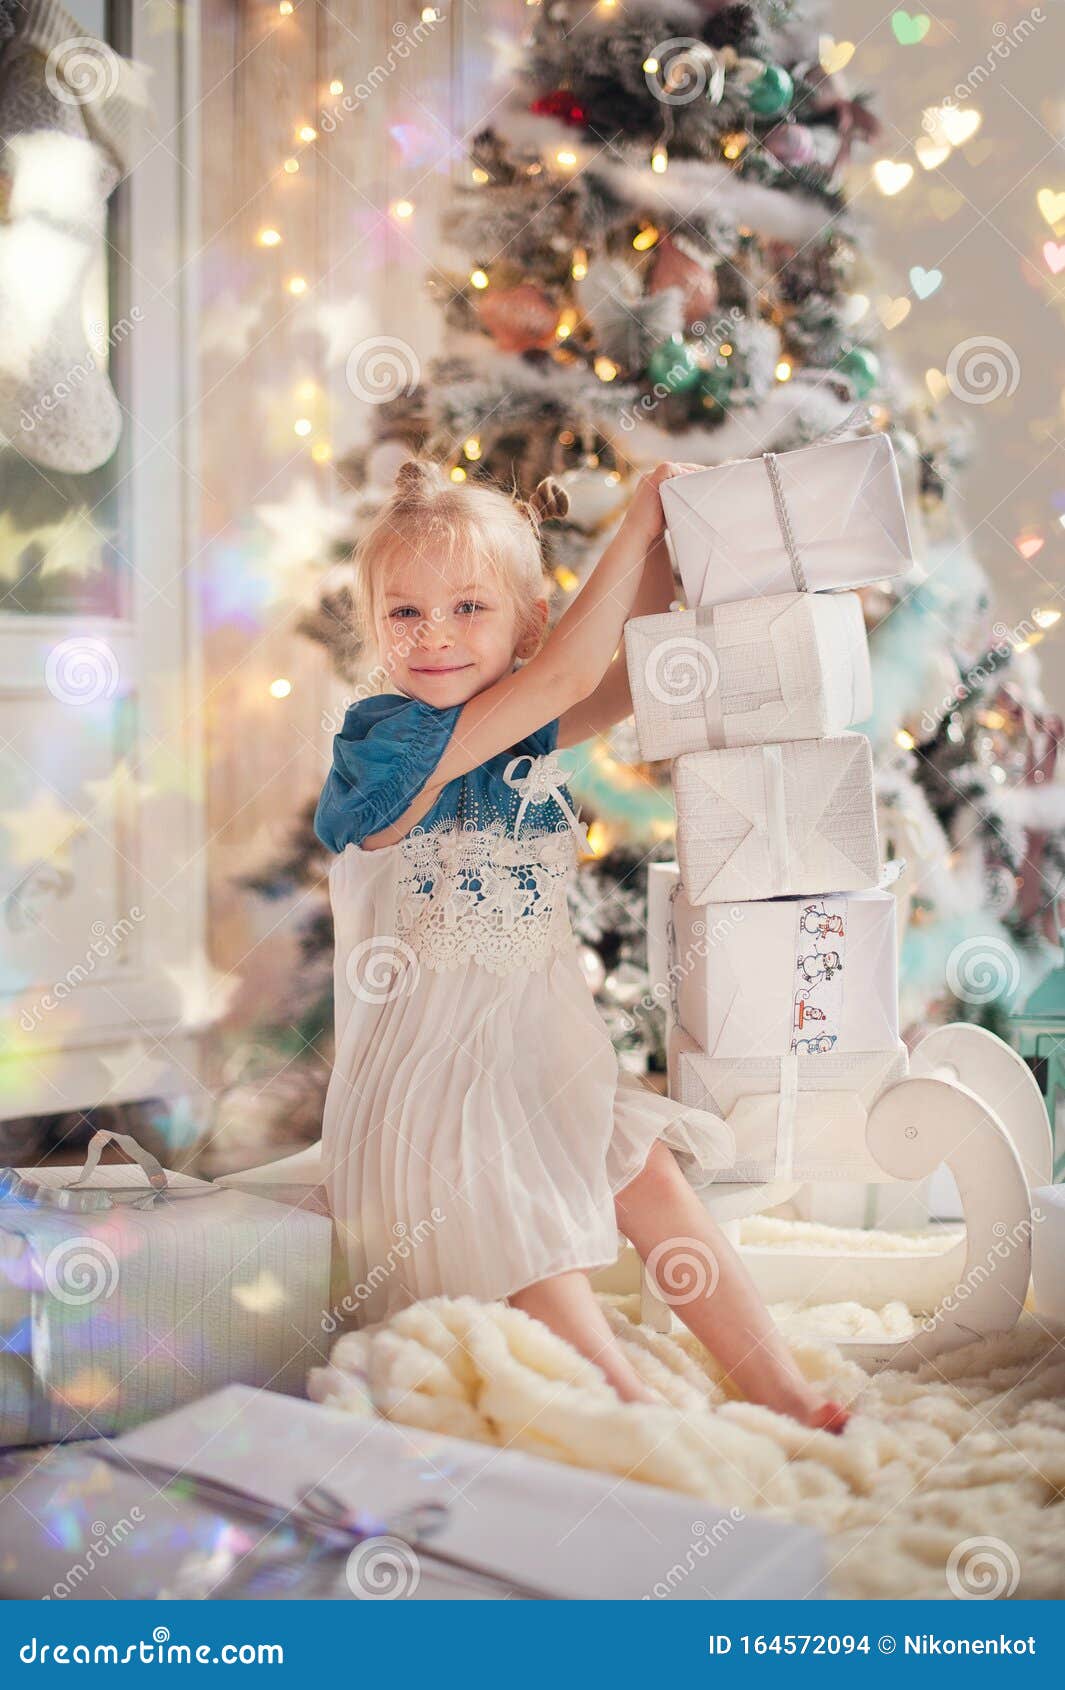 Cute Little Child Girl in Dress Smiling and Having Fun on Bed in White ...